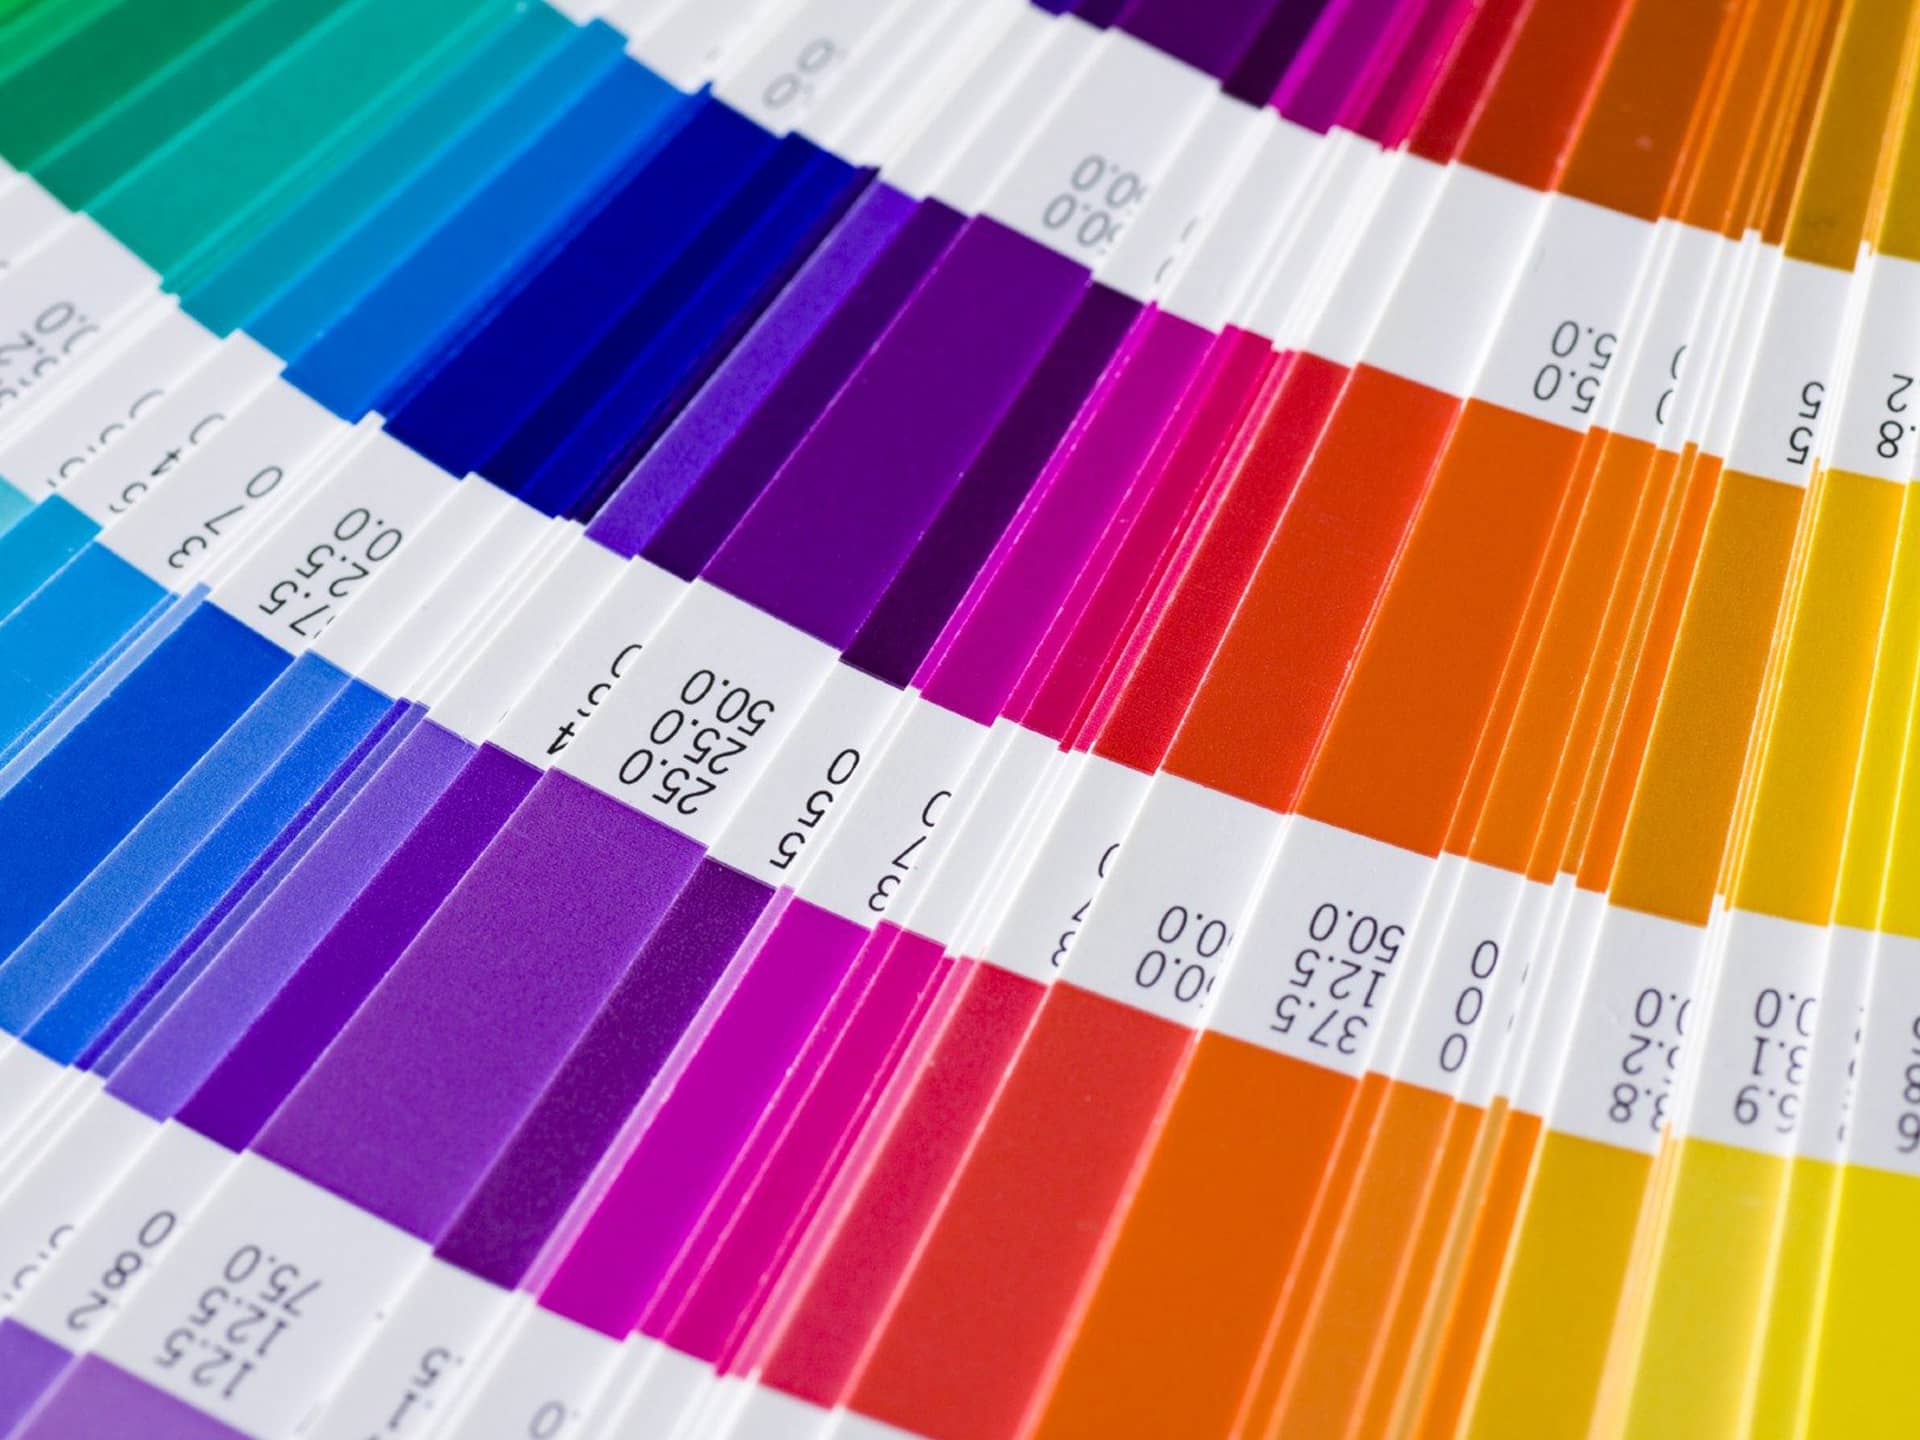 Top tips for choosing brand colours